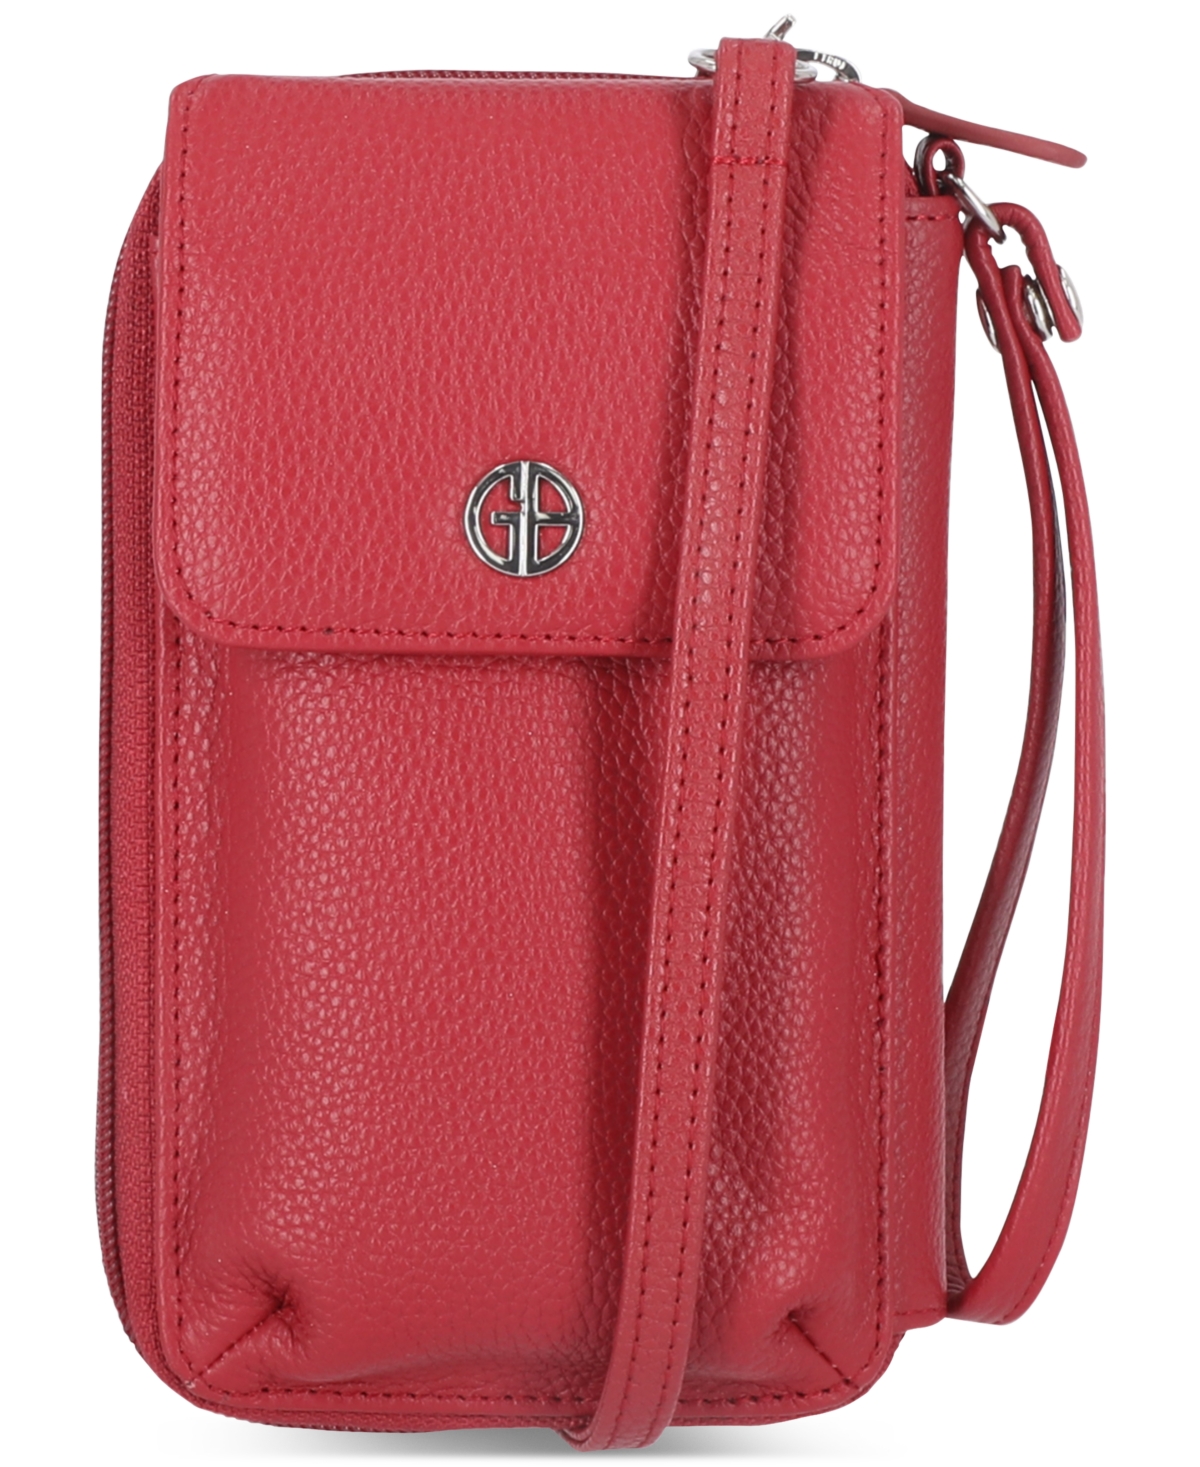 Softy Leather Tech Crossbody Wallet, Created for Macy's - Red